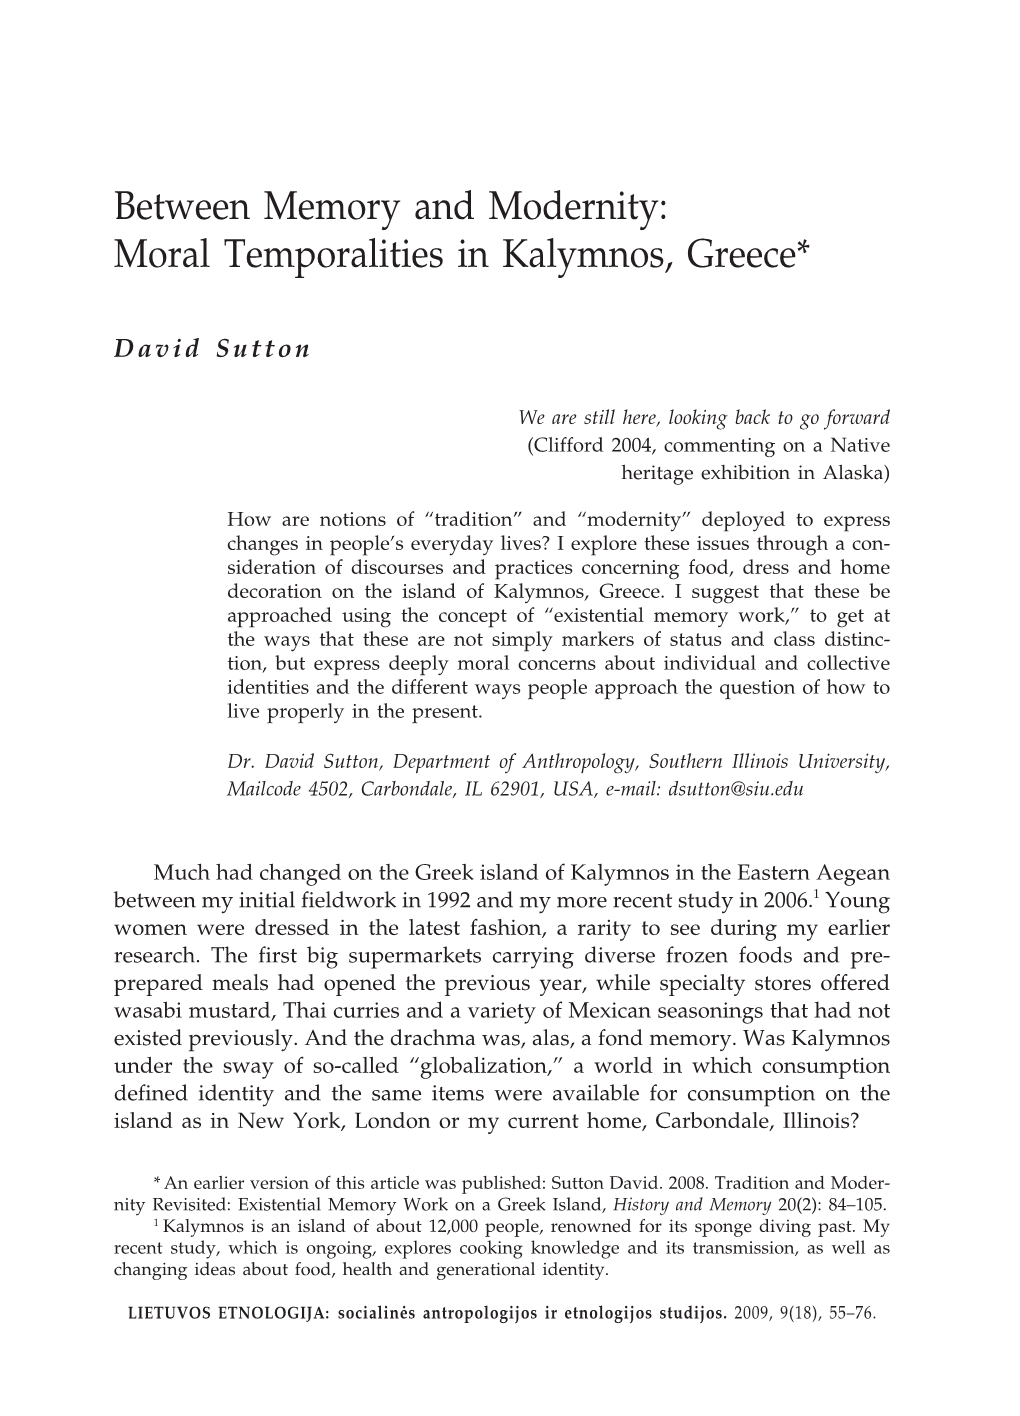 Between Memory and Modernity: Moral Temporalities in Kalymnos, Greece*